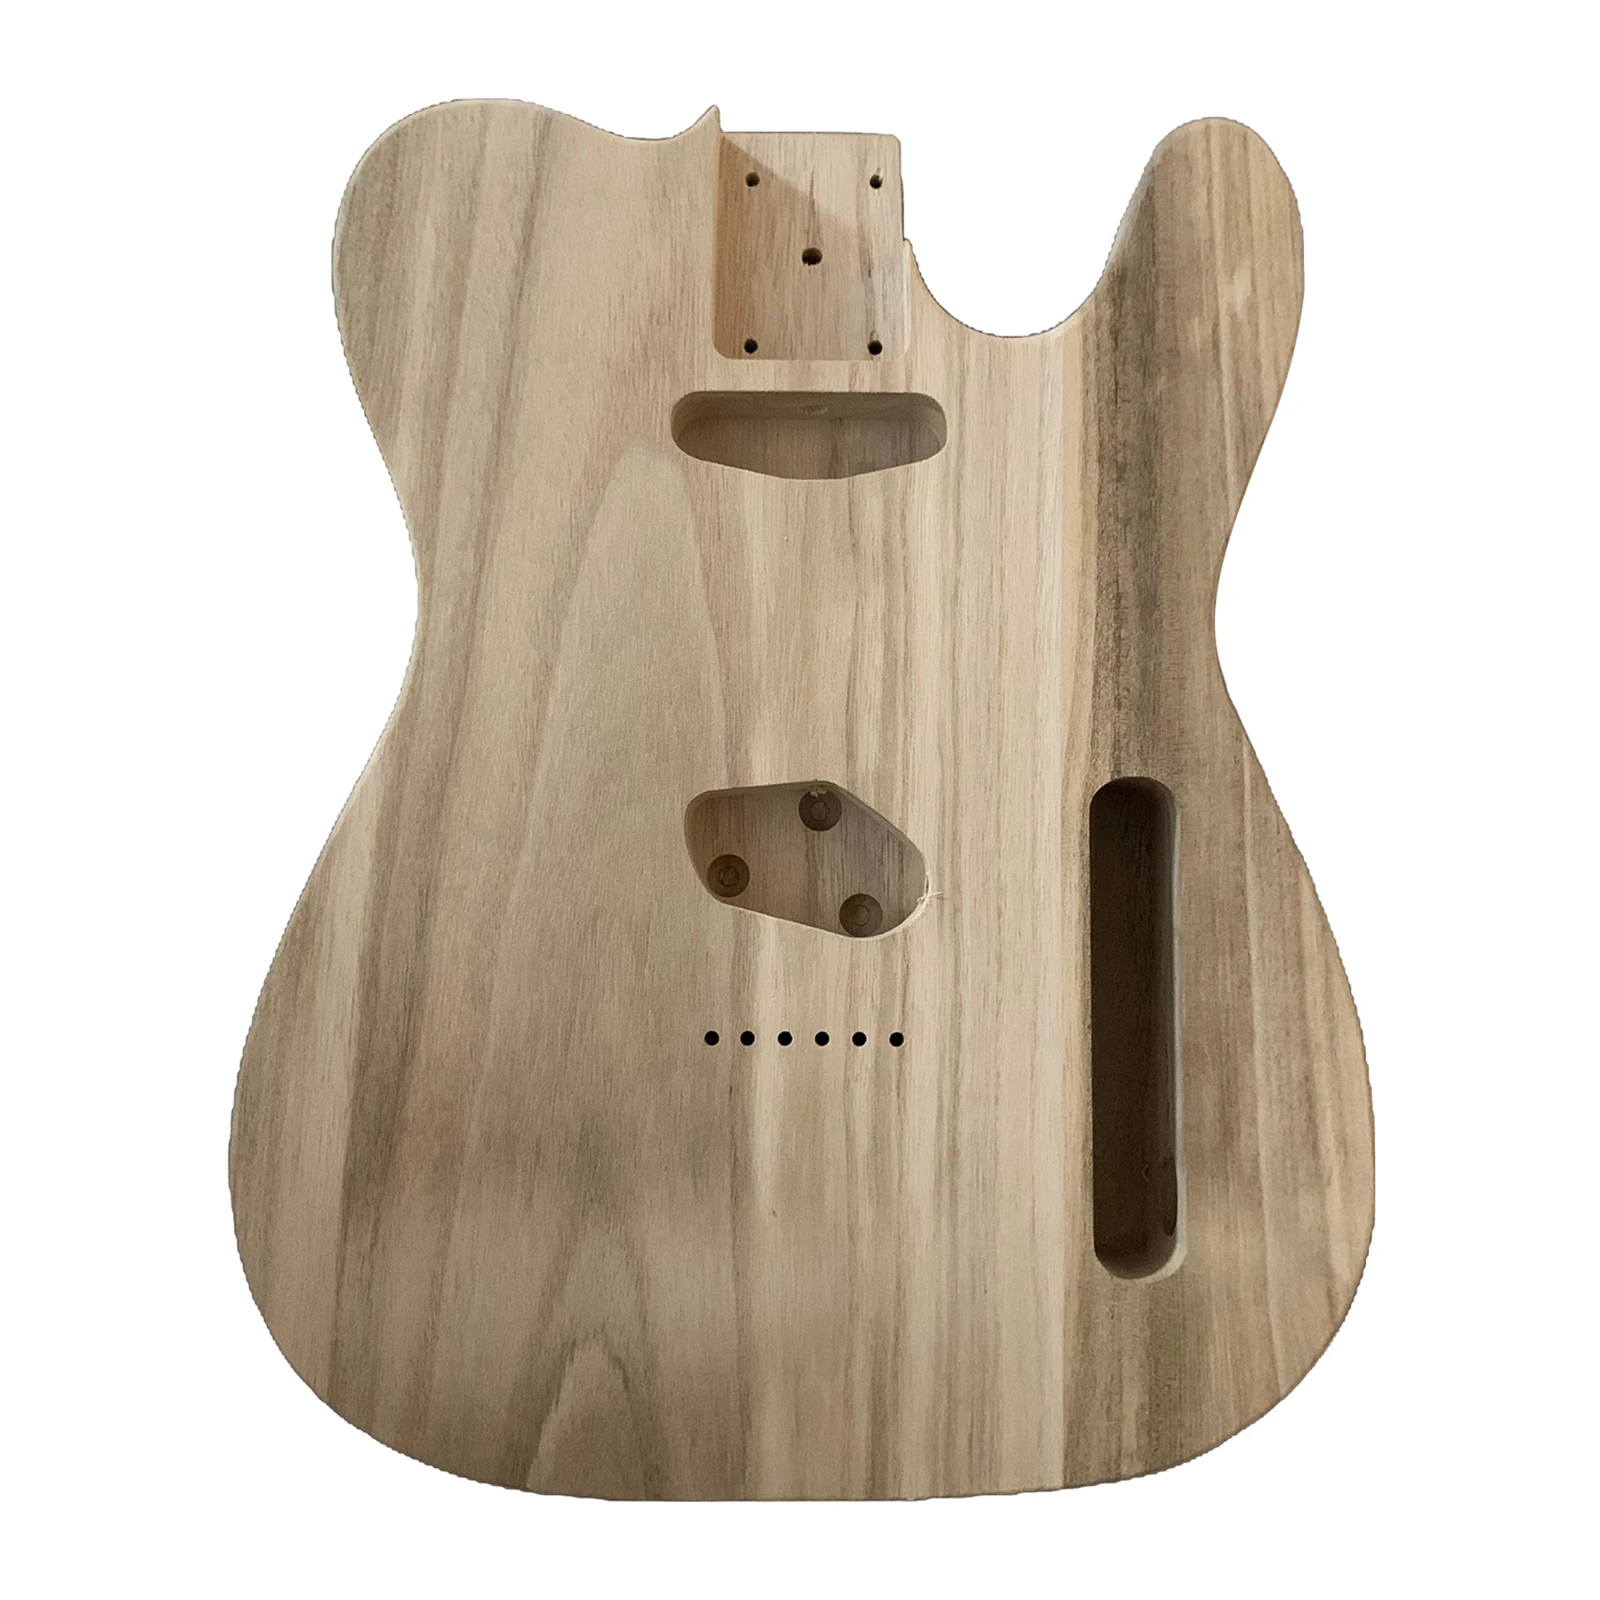 

Hollowed Sanding Unfinished Handcraft Electric Guitar Maple Wood Body Barrel for T Style DIY Electric Guitar Body Parts